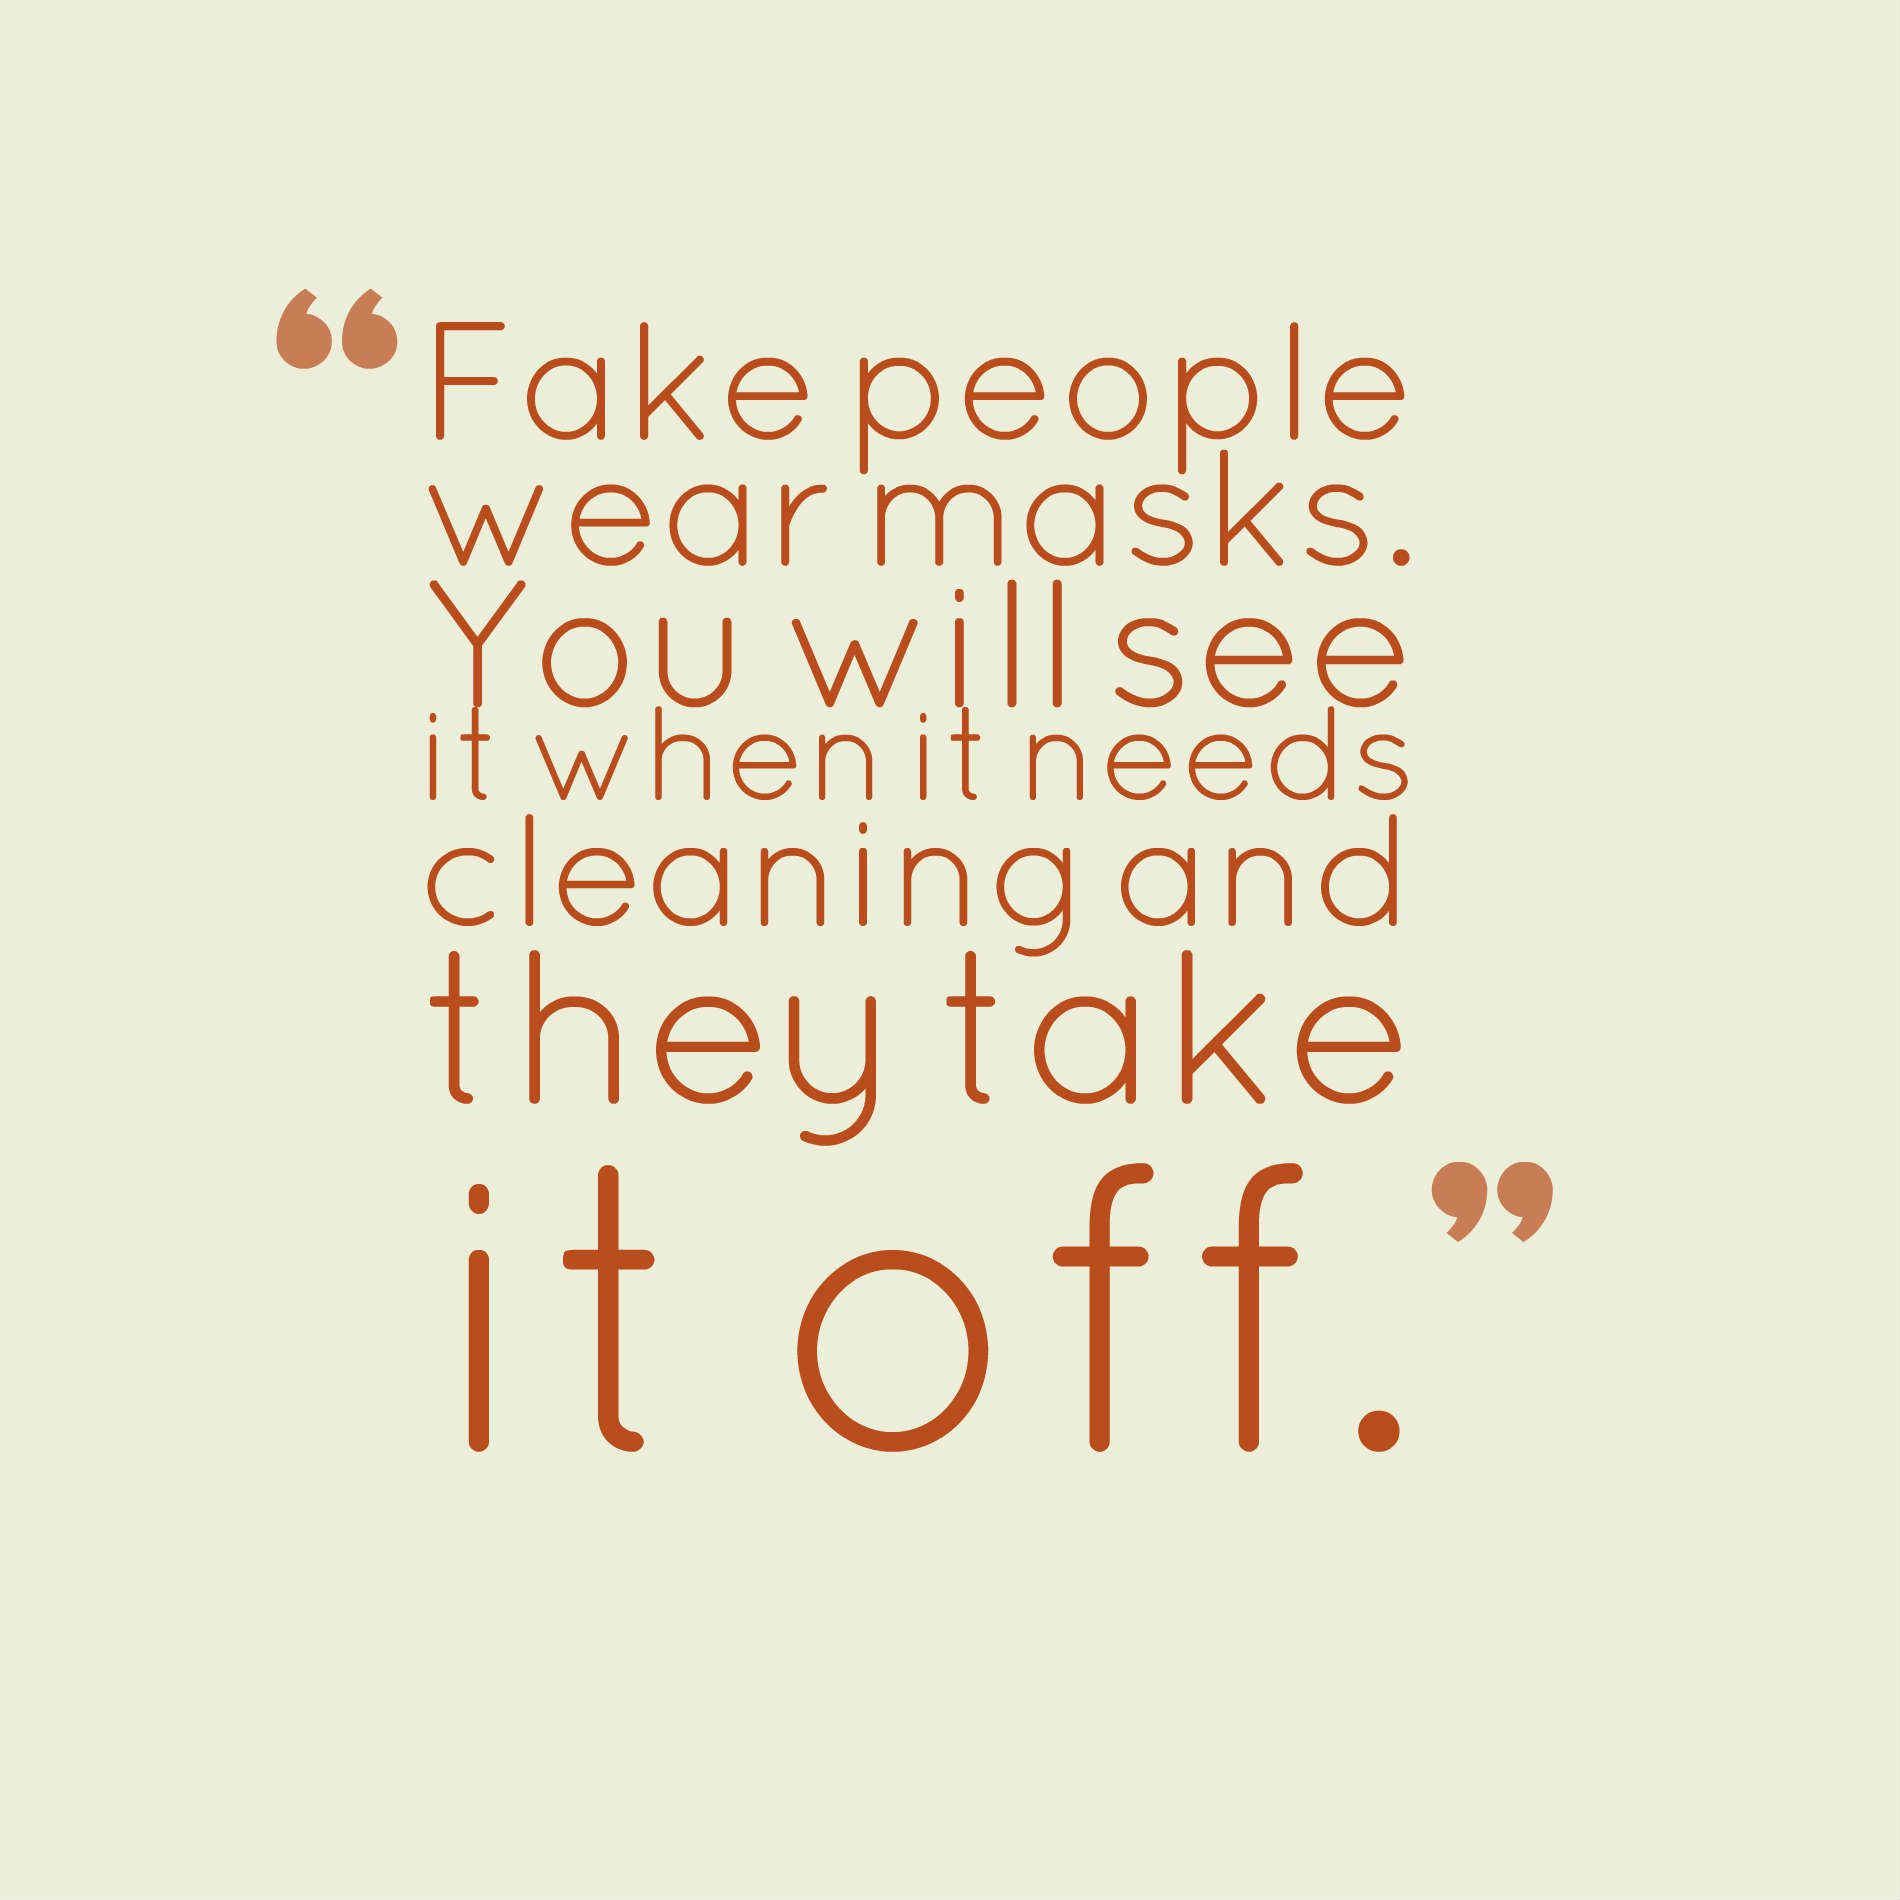 Fake people wear masks. You will see it when it needs cleaning and they take it off.